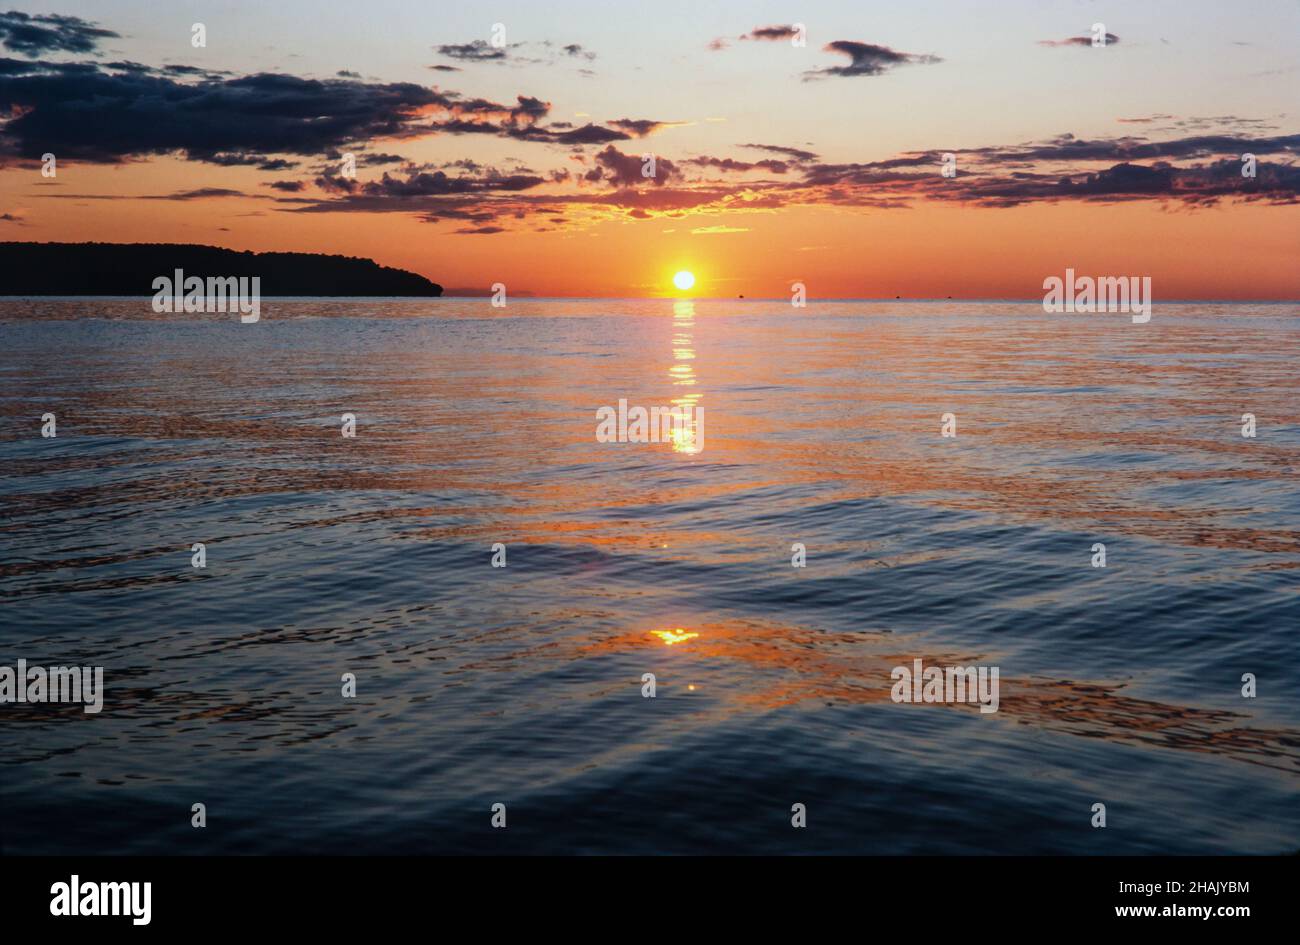 The sun sets over Lake Michigan at Gills Rock, Wisconsin, on the Door County peninsula. Stock Photo